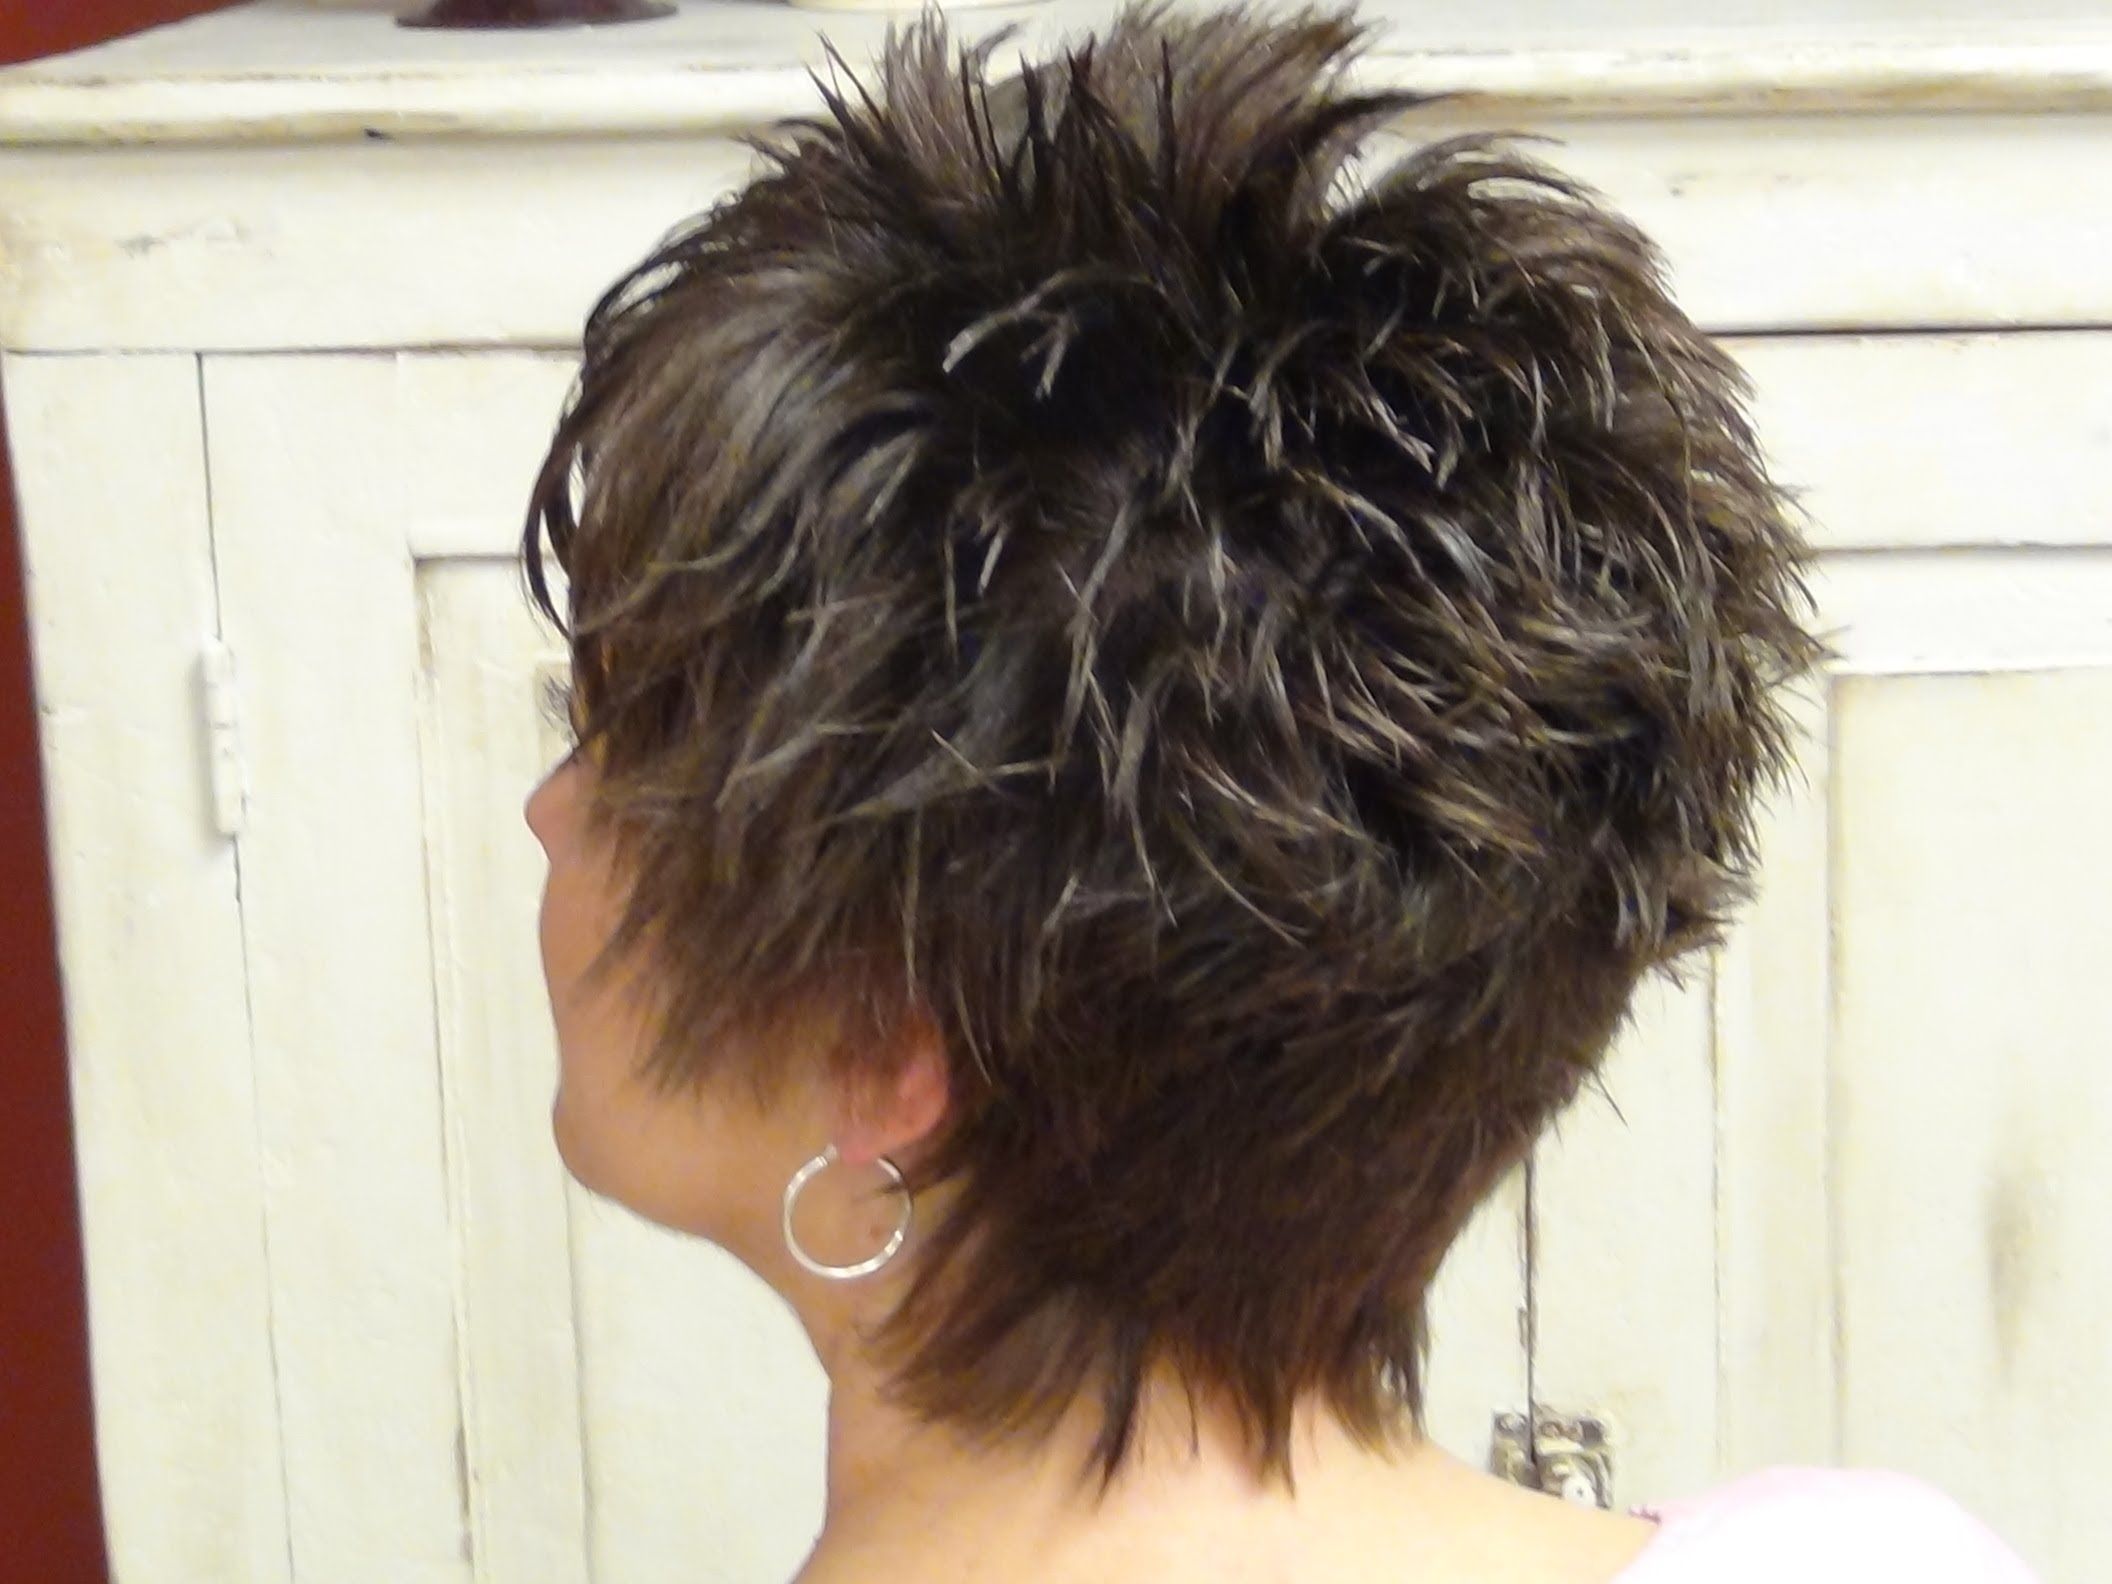 Back View Of Short Shaggy Hairstyles – Hairstyle For Women & Man Within Widely Used Short Shaggy Curly Hairstyles (View 7 of 15)